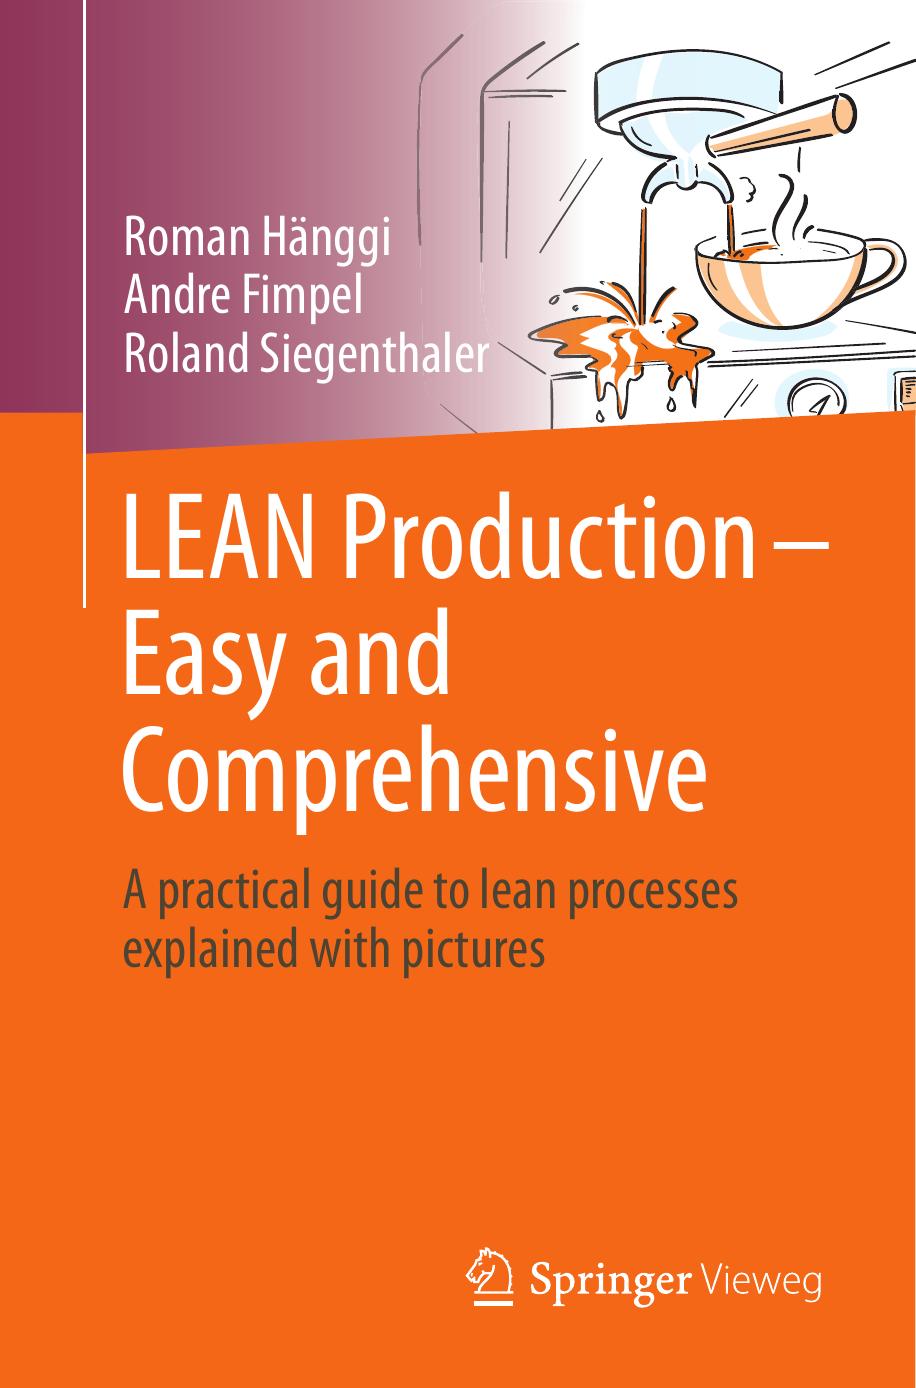 LEAN Production – Easy and Comprehensive: A Practical Guide to Lean Processes Explained With Pictures